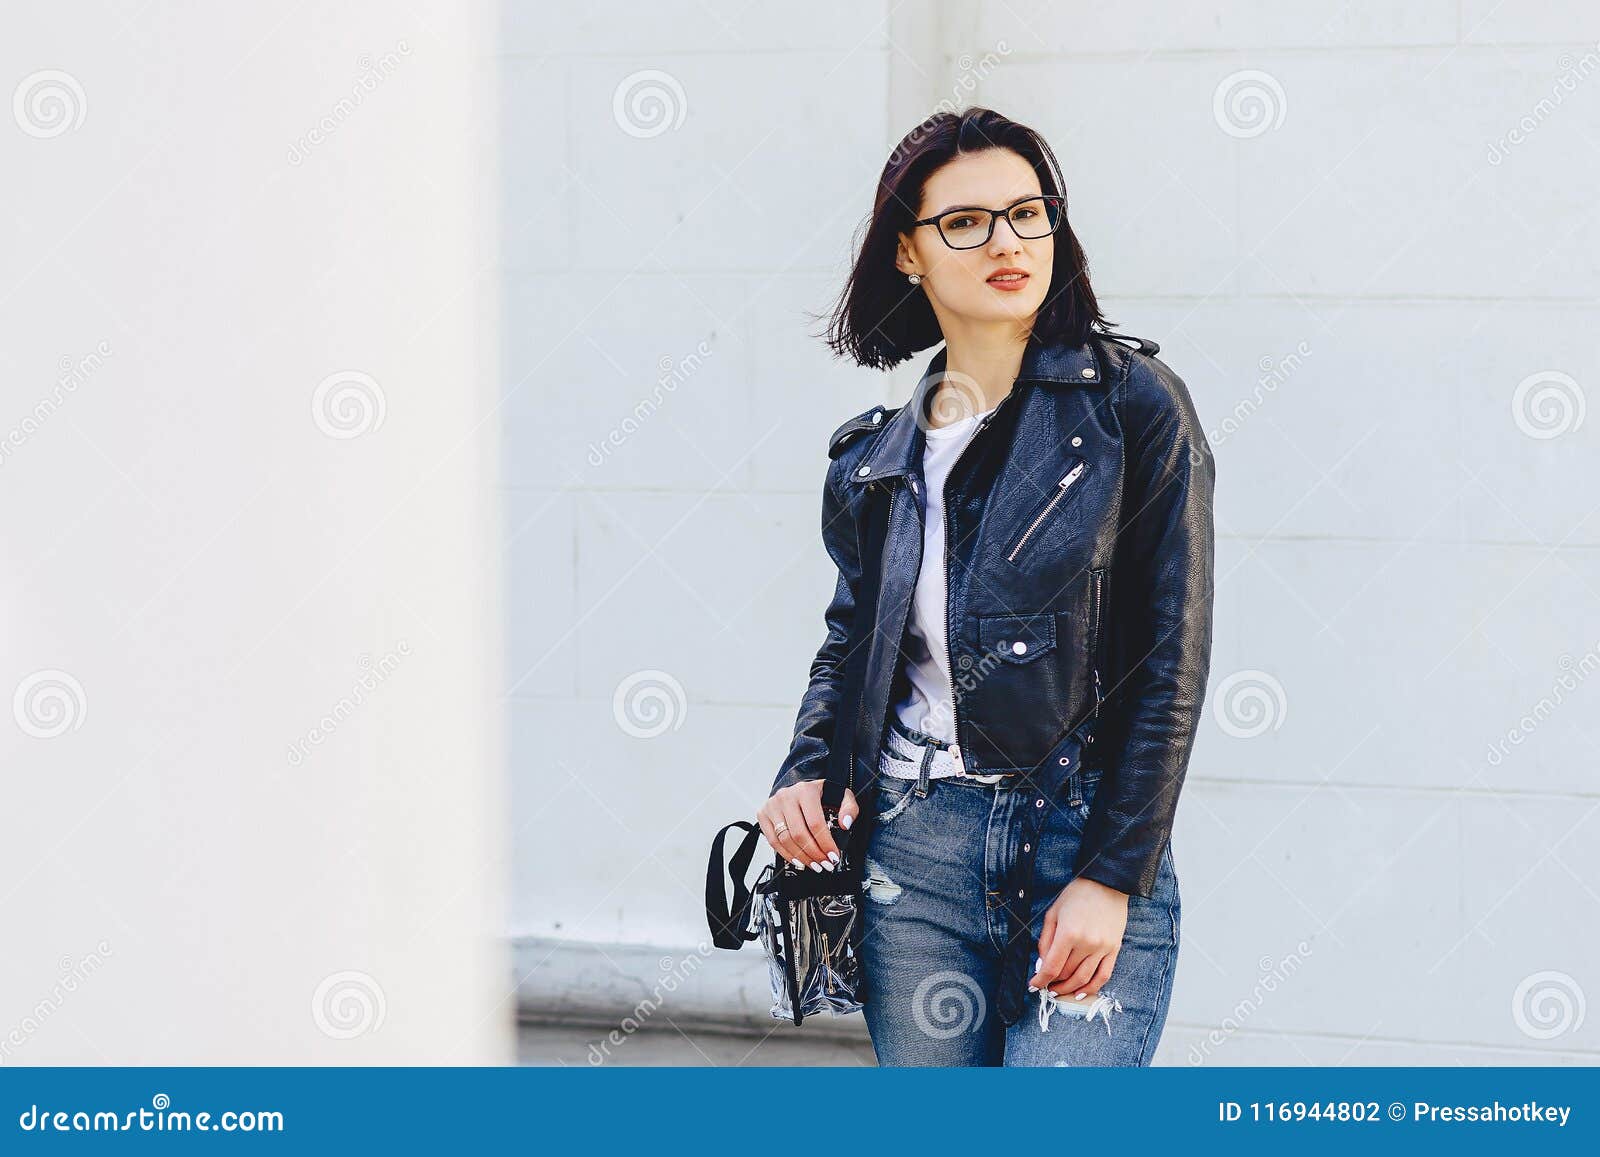 Woman in Glasses in Leather Jacket on Street Stock Photo - Image of ...